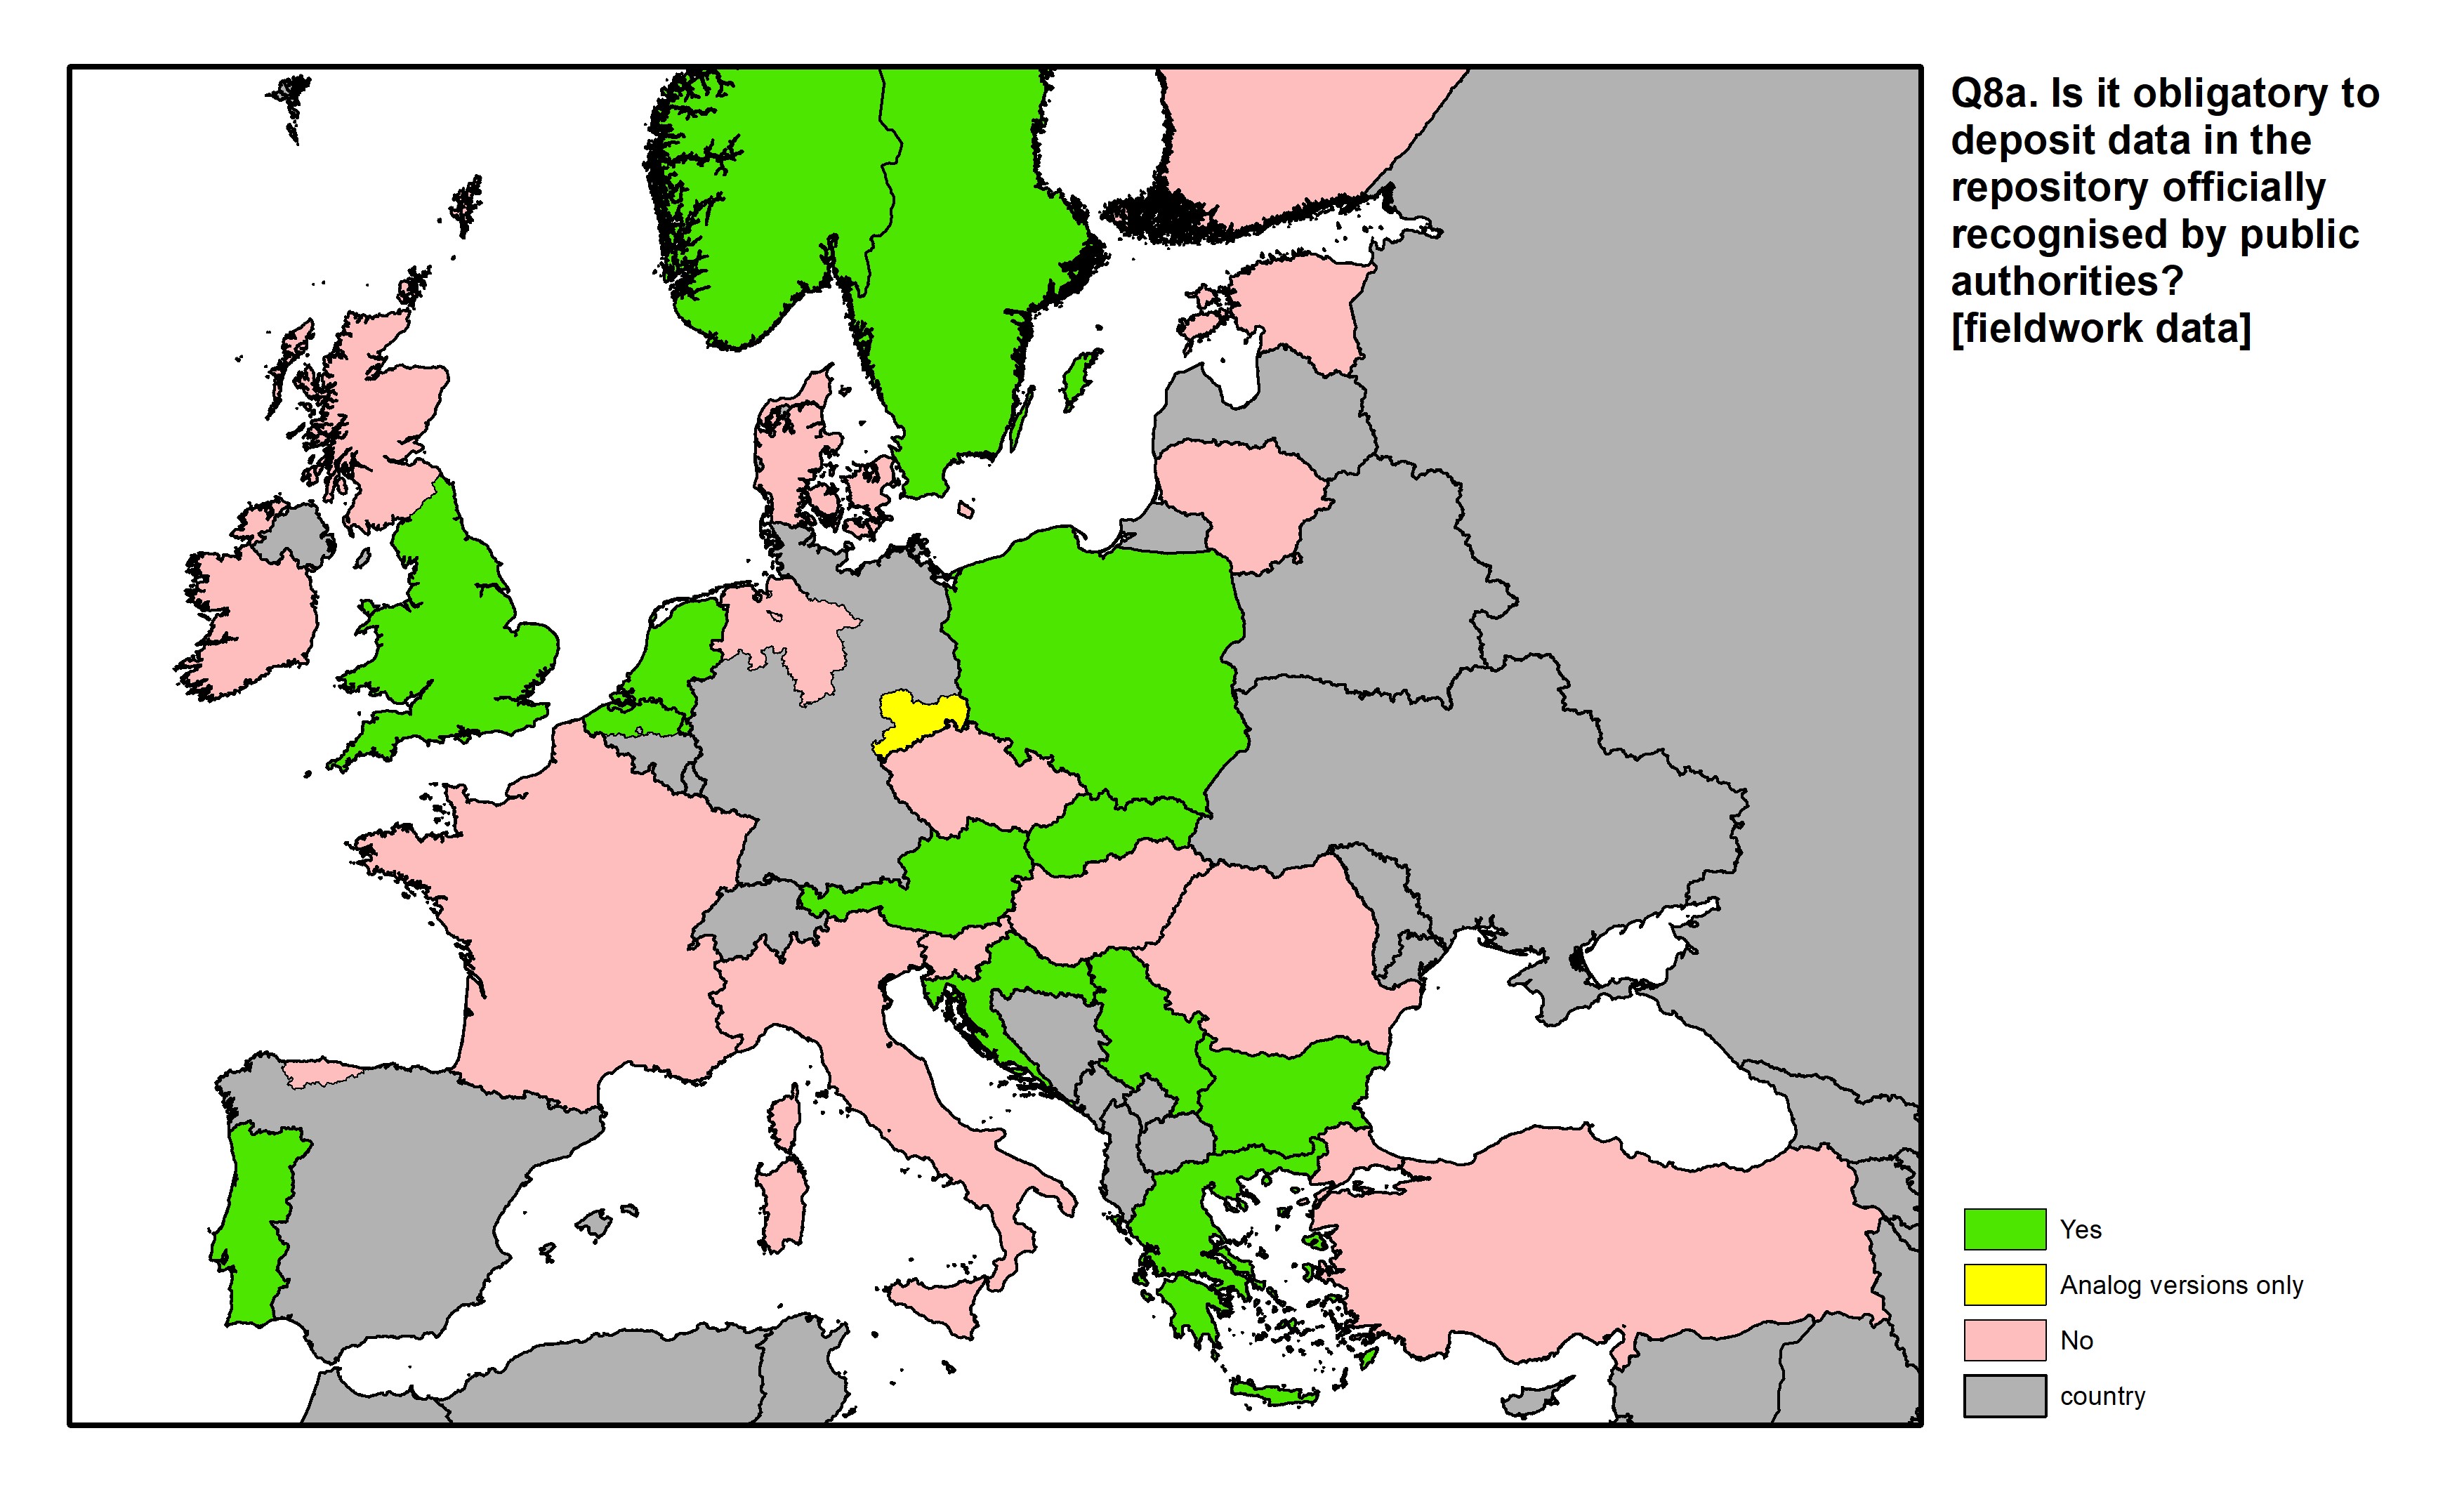 Figure 24: a map of Europe showing countries and regions in colour based on response rates to the survey question.